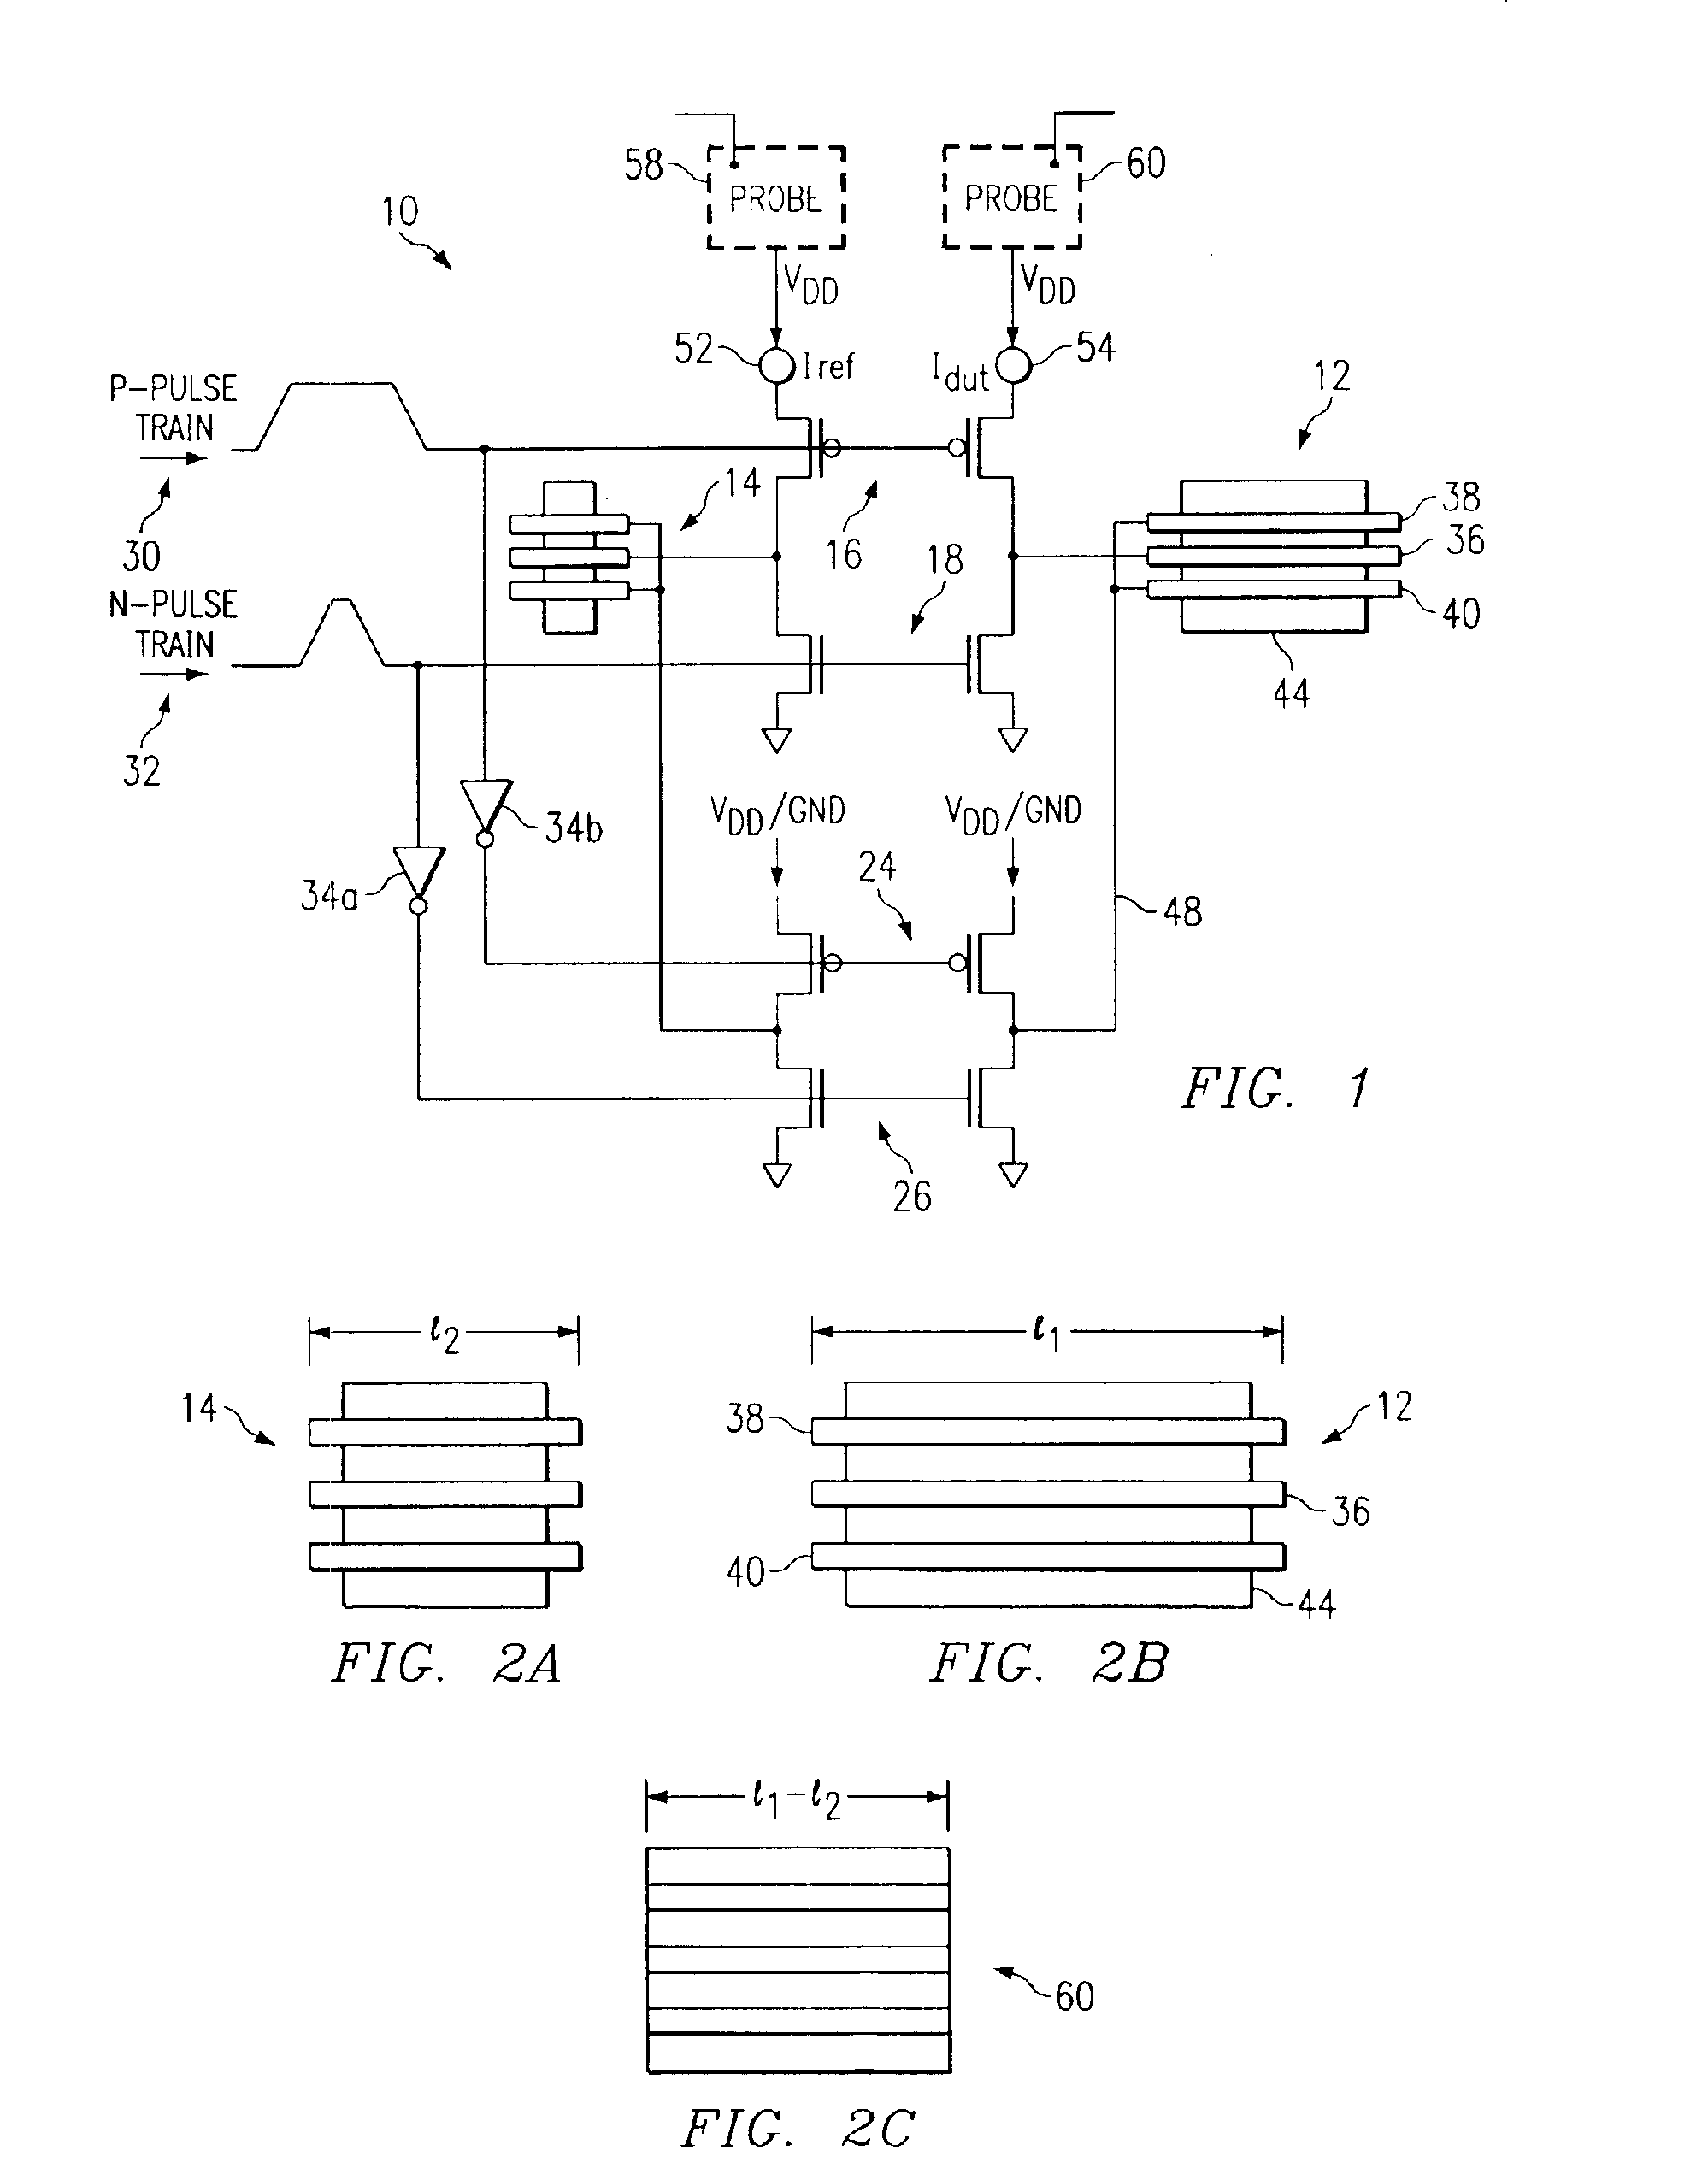 System and method for measuring a capacitance associated with an integrated circuit